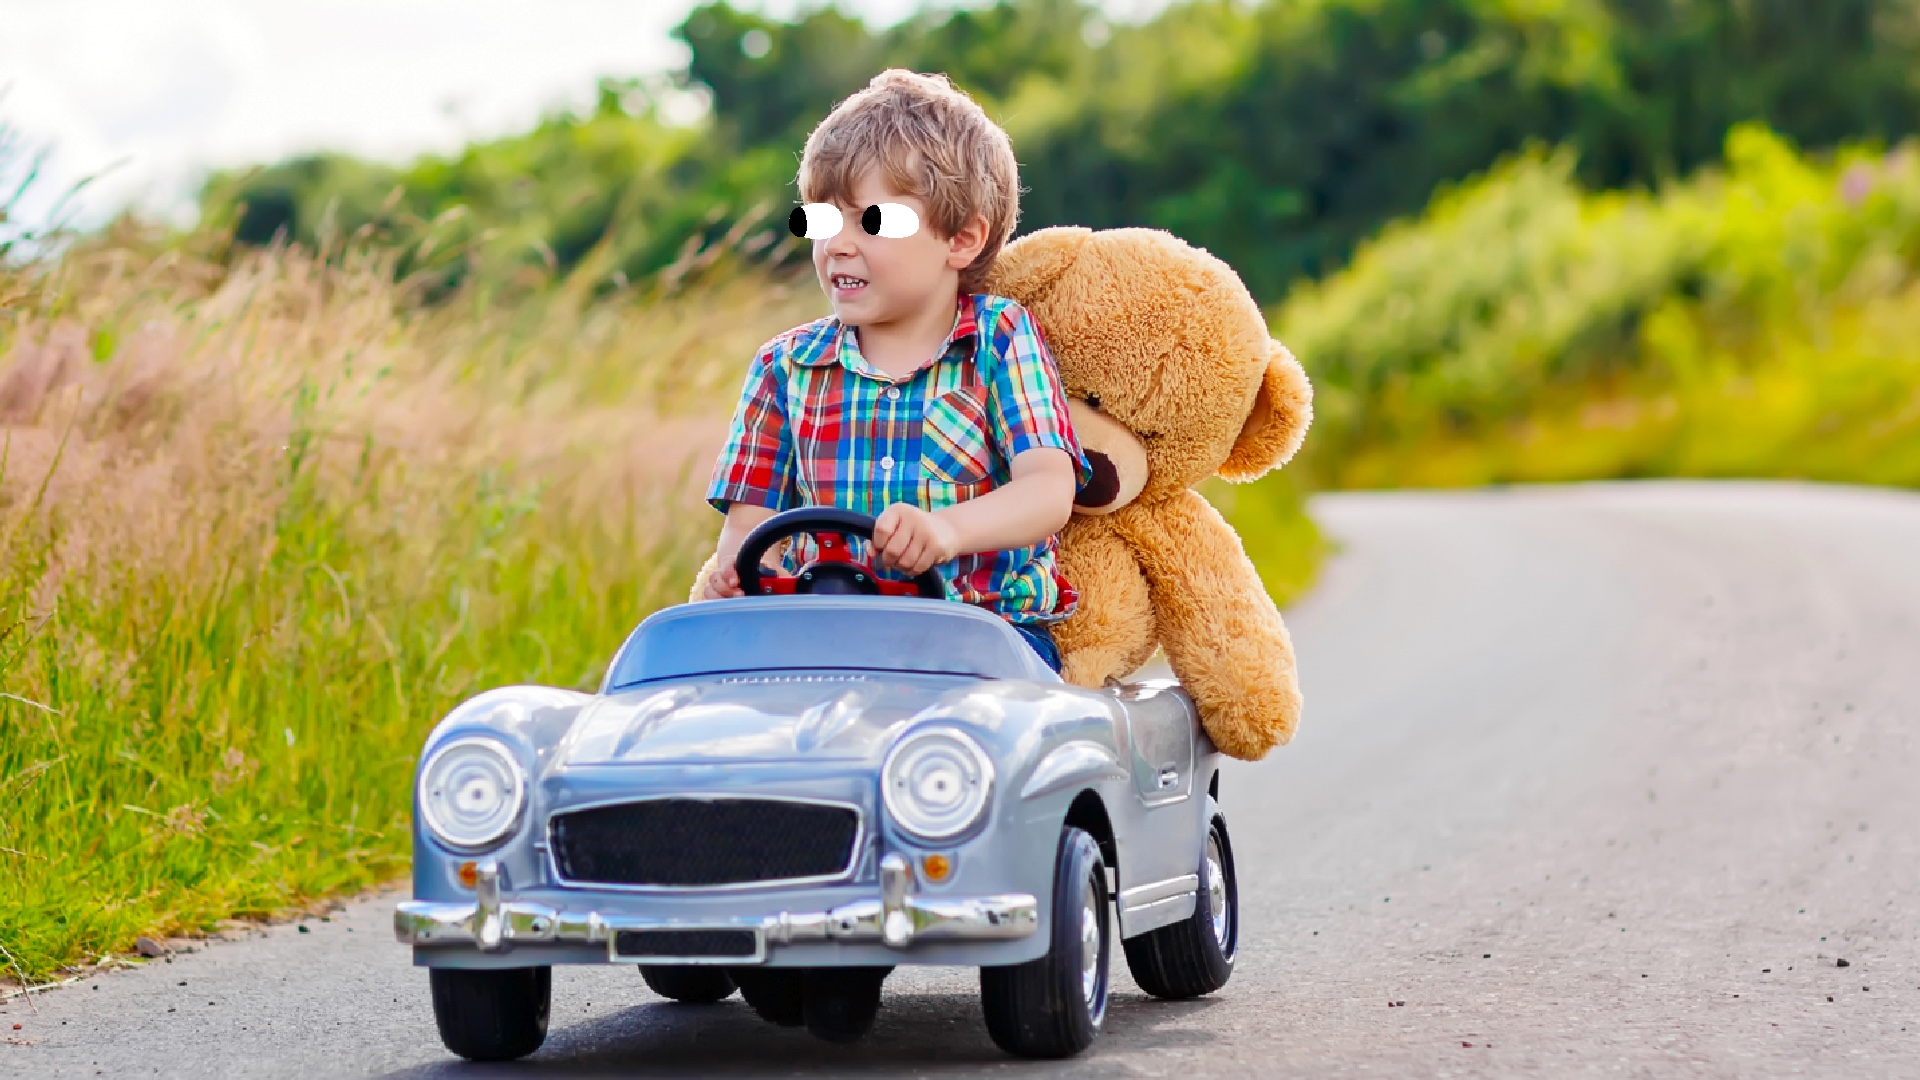 A child driving a miniature car with a teddy in the back